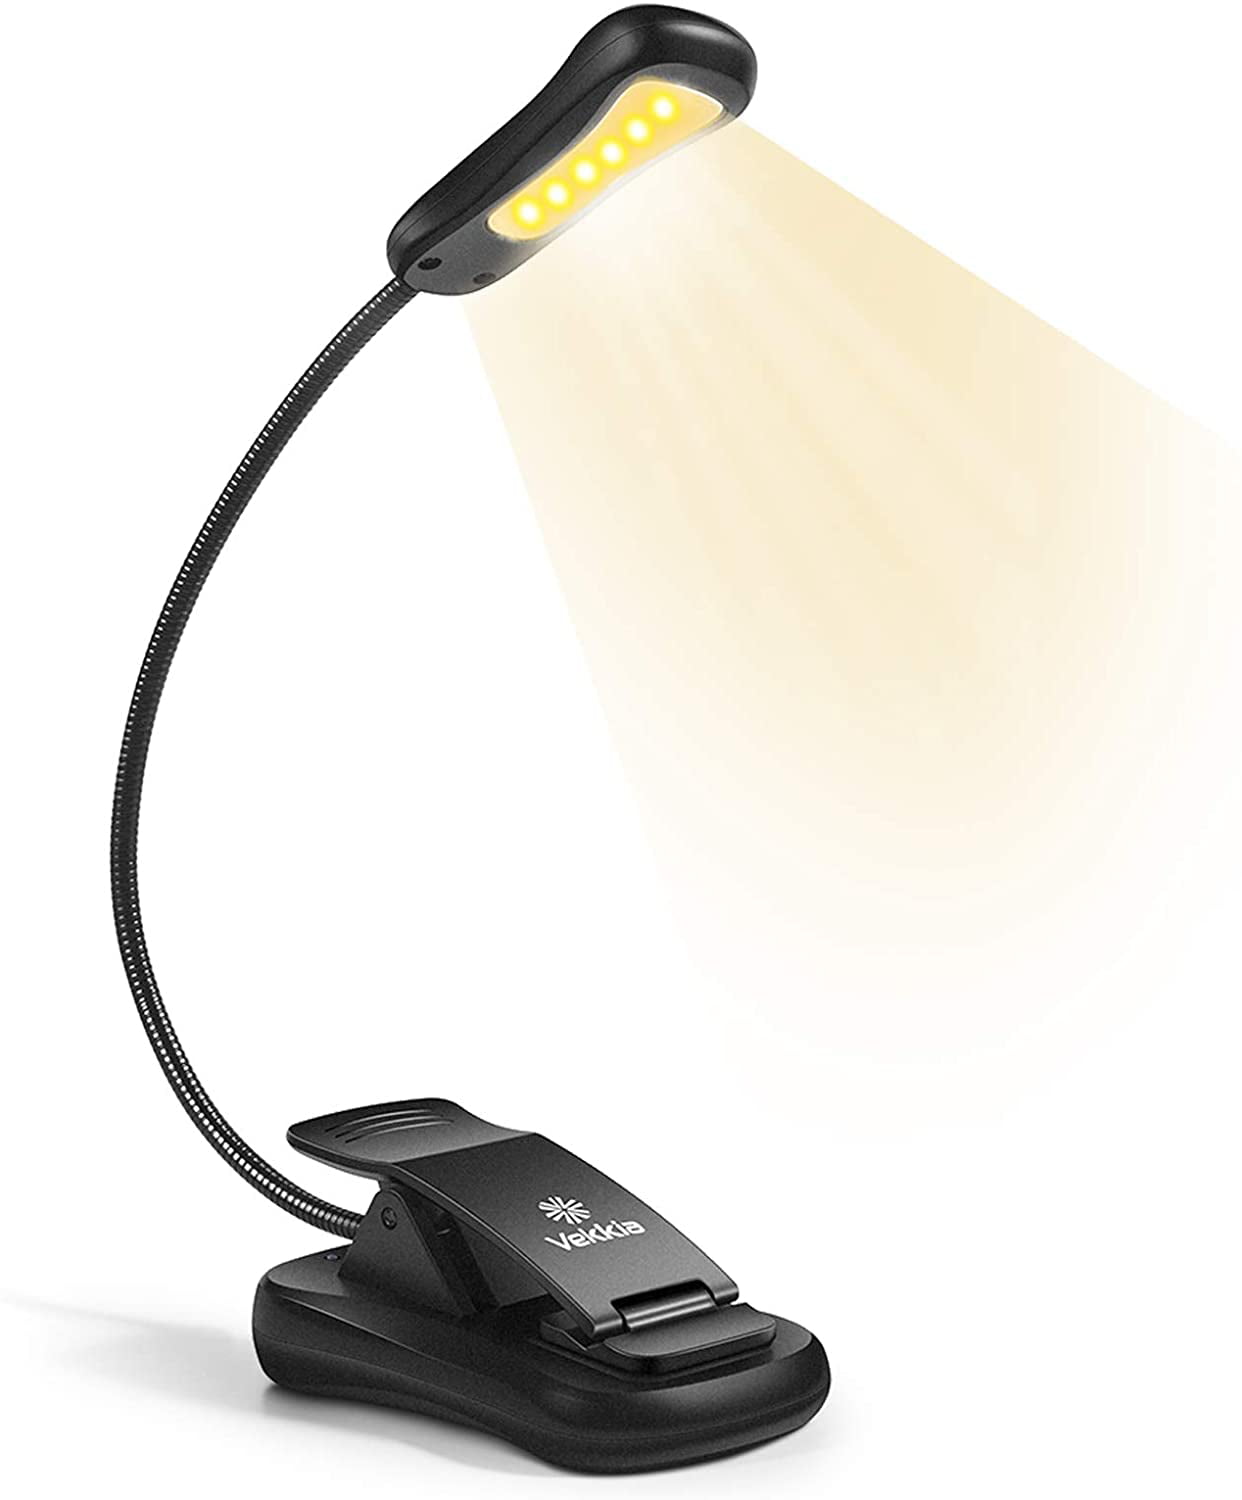 Vekkia Rechargeable-Book-Light-for-Reading-in-Bed Iron 3000K Warm 6 LED 3 Brightness Lamp 